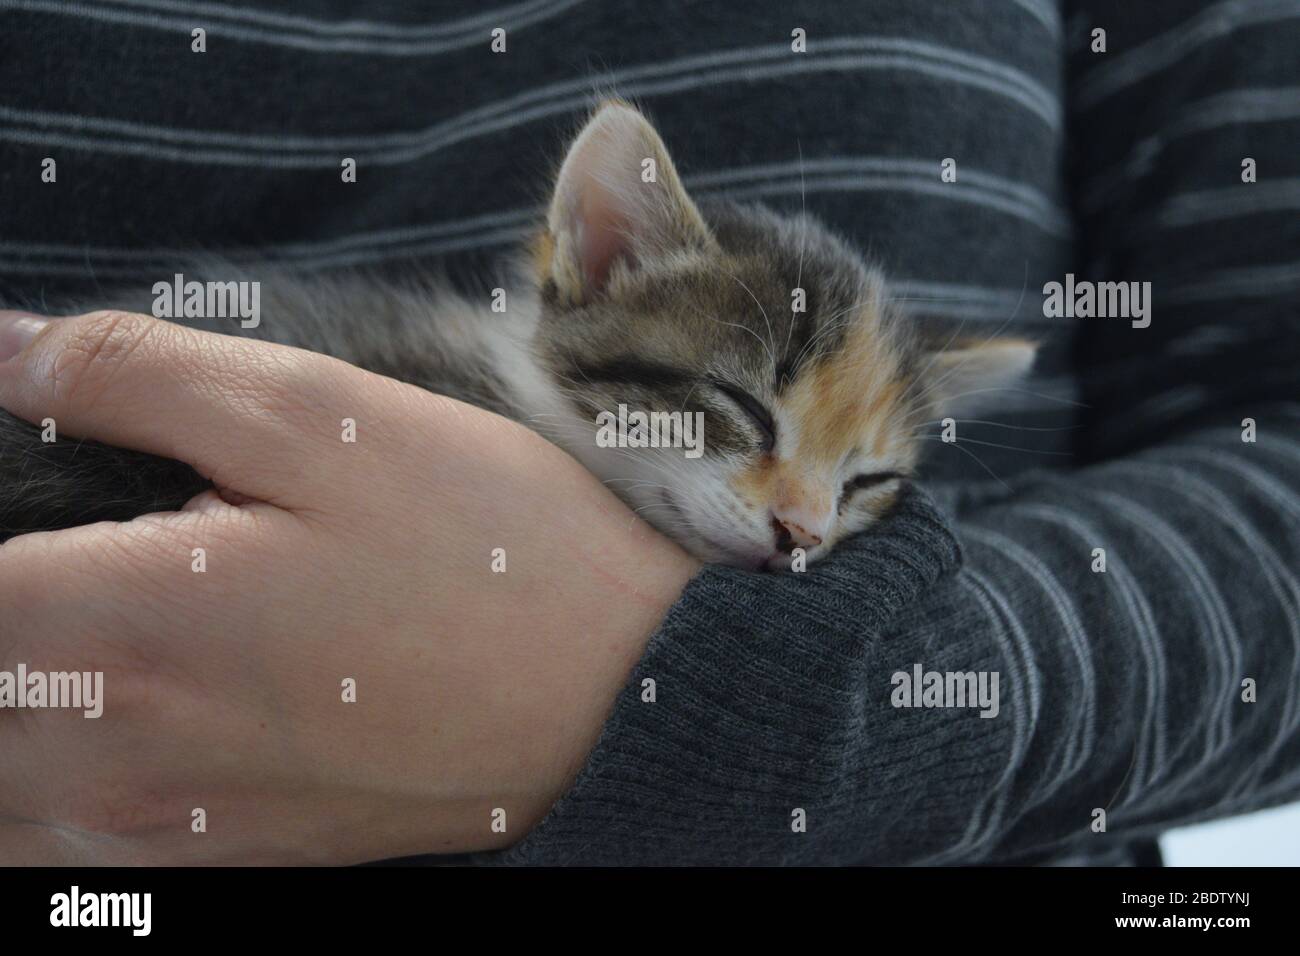 Tiny tabby kitten sleeping in woman's hand. Kitten season and foster for shelters. Young cat adoption Stock Photo